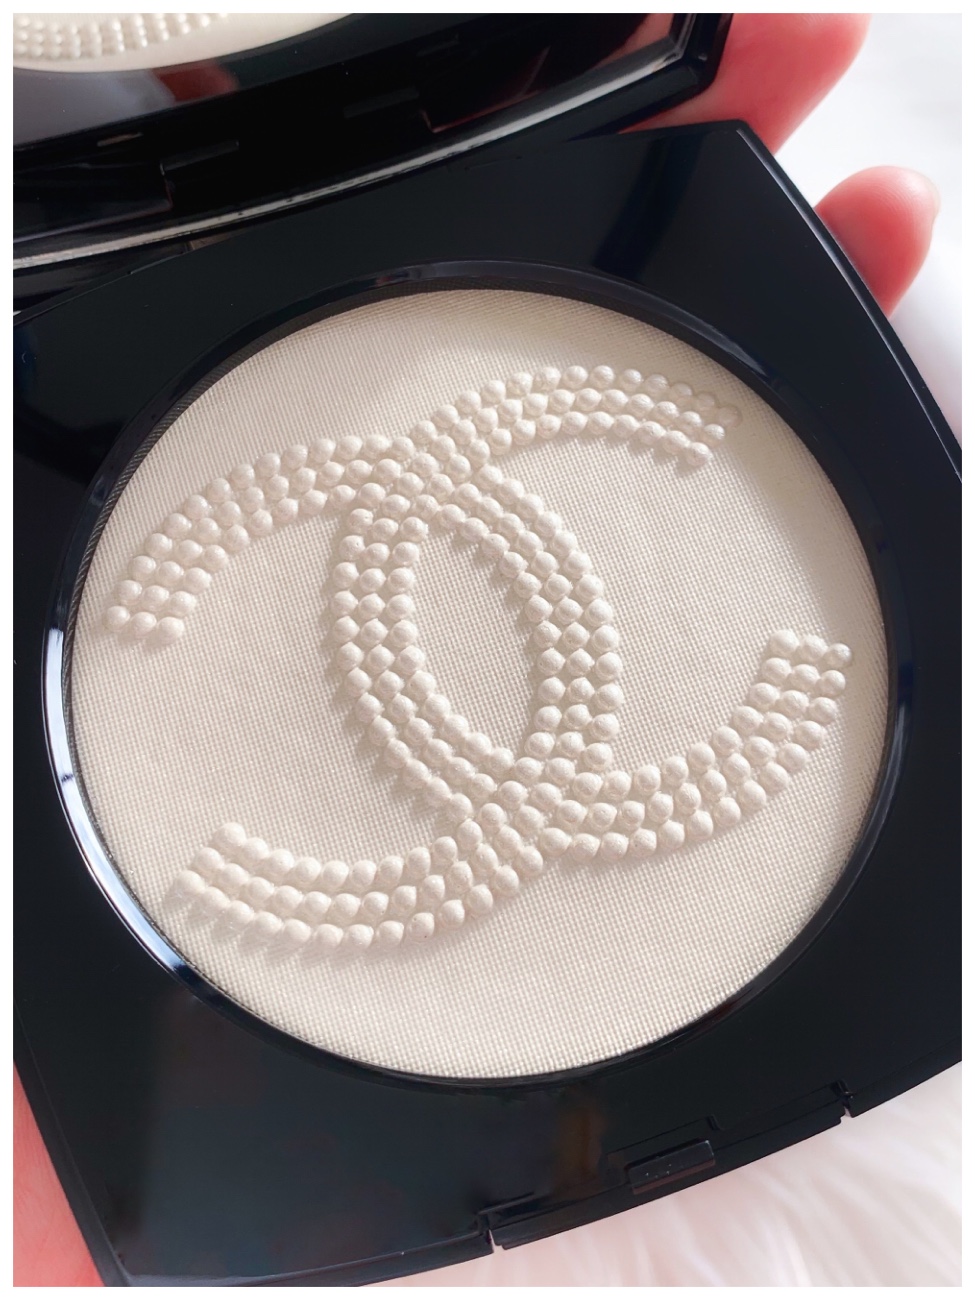 Chanel Highlighters Poudre Lumiere and Le Signe du Lion - The